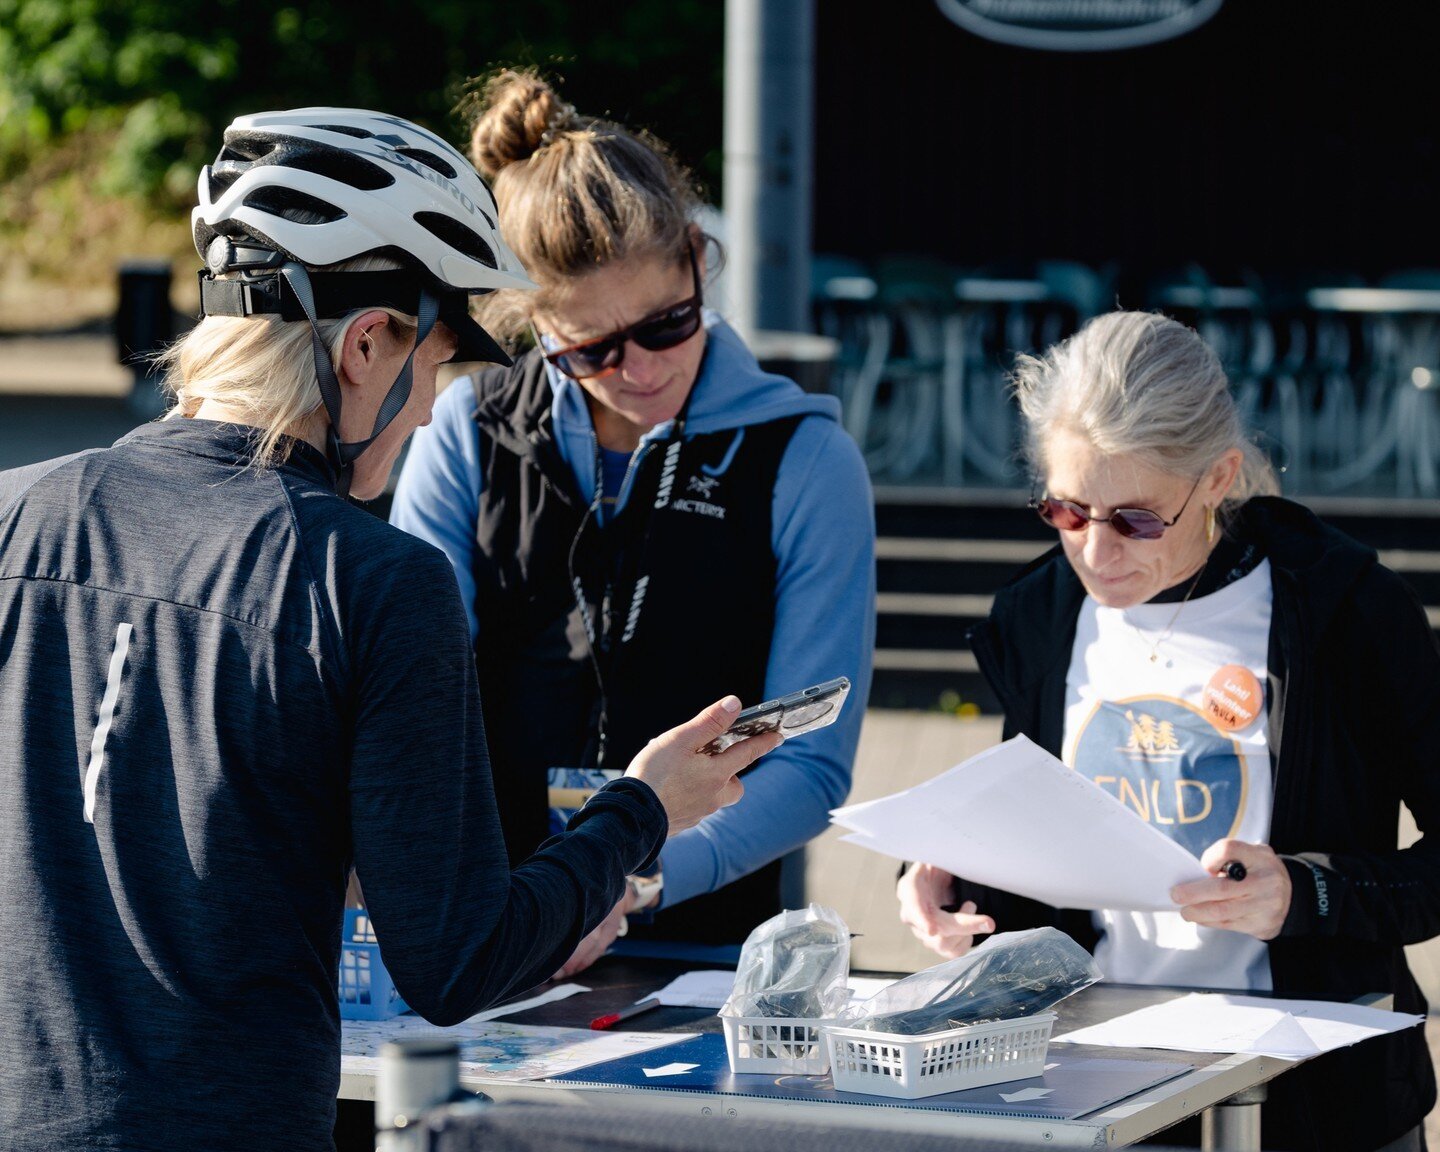 We are excited to return to Lahti in just a few short months! Did you know, we are always looking for volunteers to help us out for the event. Our events wouldn&rsquo;t be what they are without our amazing volunteers. Anyone is invited to sign up to 